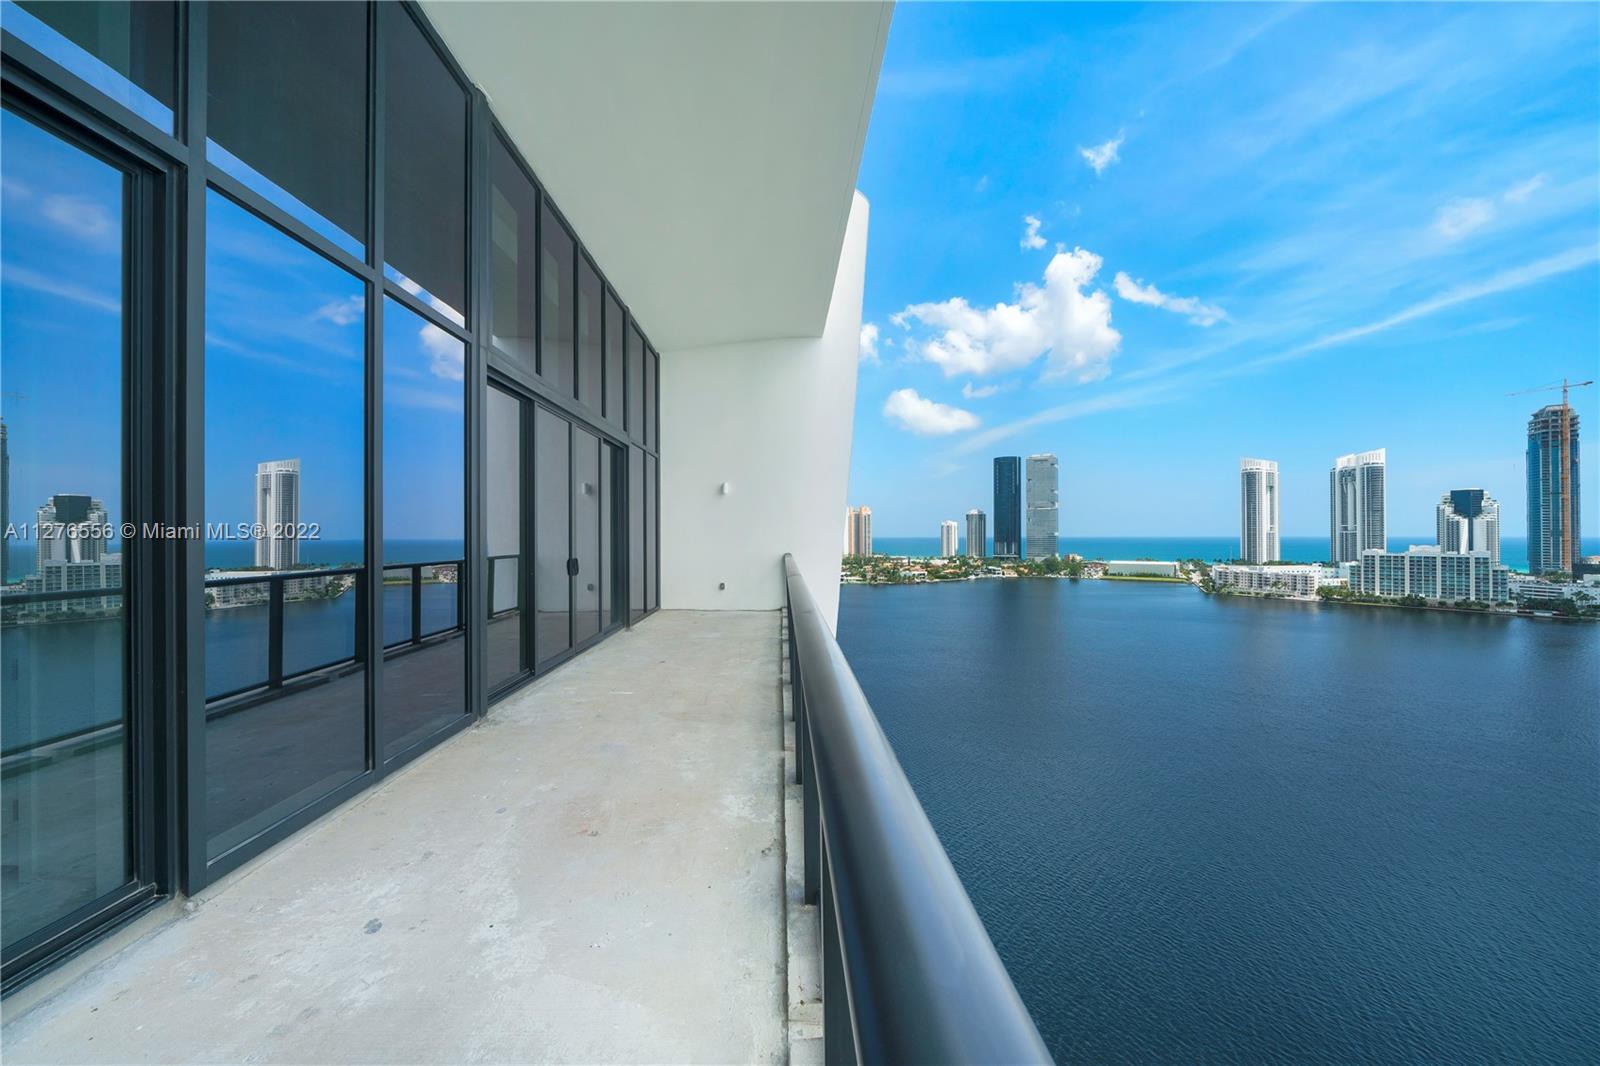 Photo 1 of Prive South Apt 1503 in Aventura - MLS A11276556